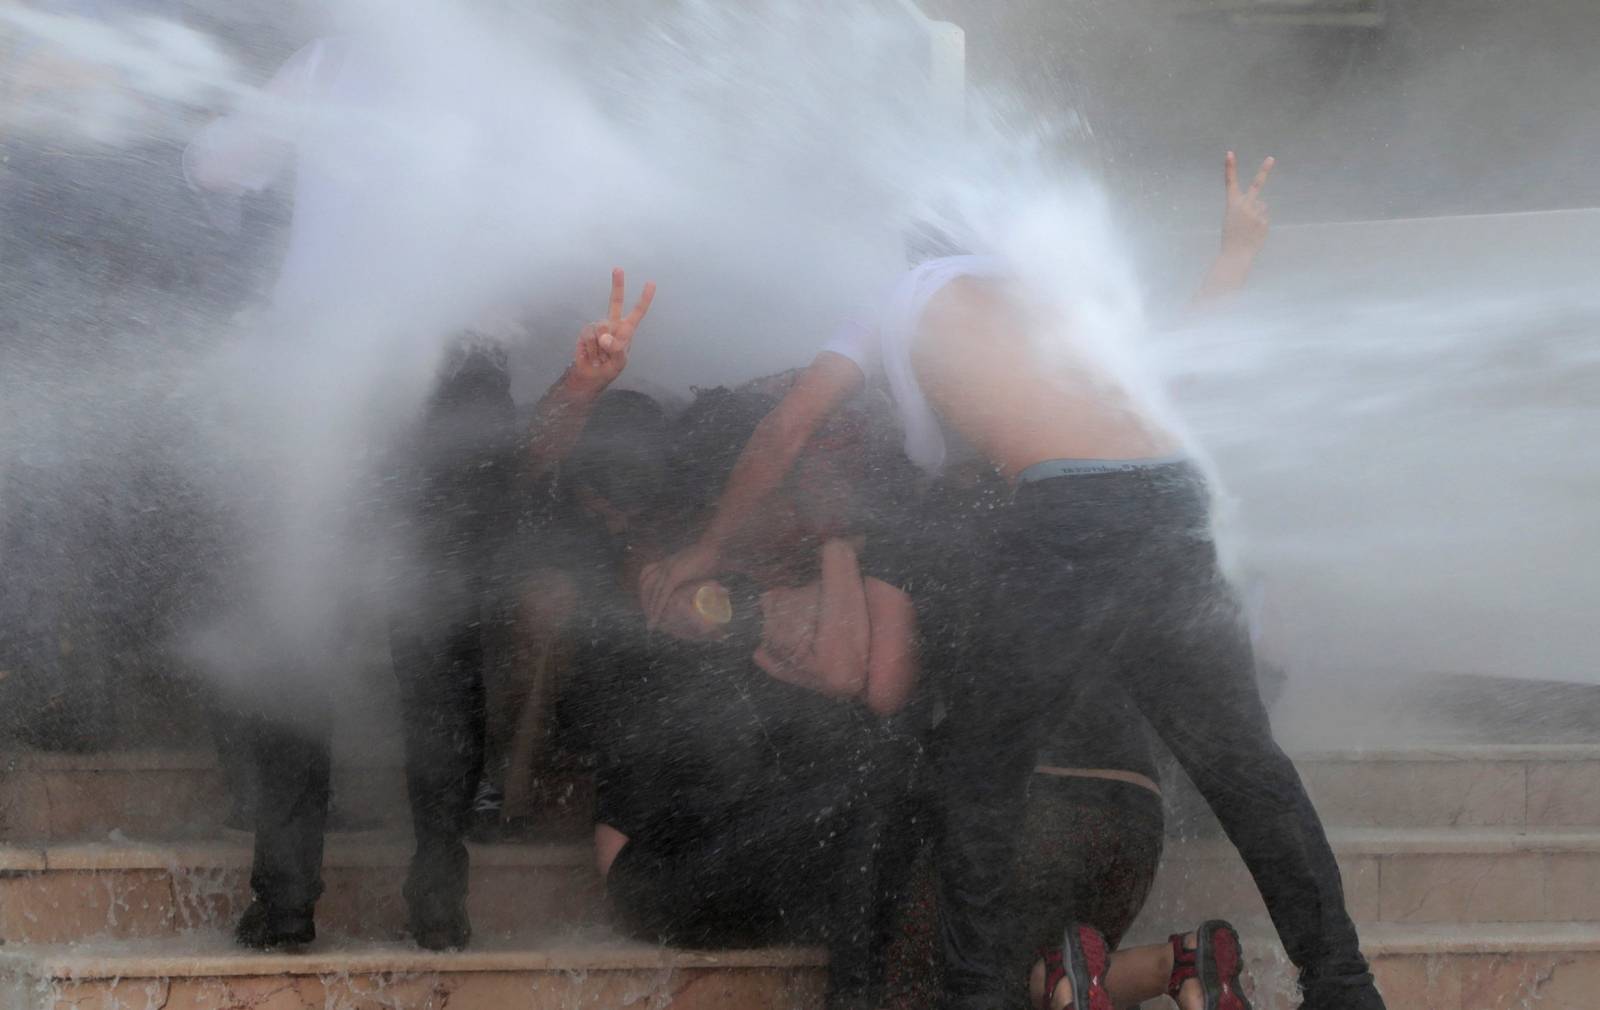 Police use a water cannon to disperse demonstrators during a protest against the replacement of Kurdish mayors with state officials in three cities, in Diyarbakir